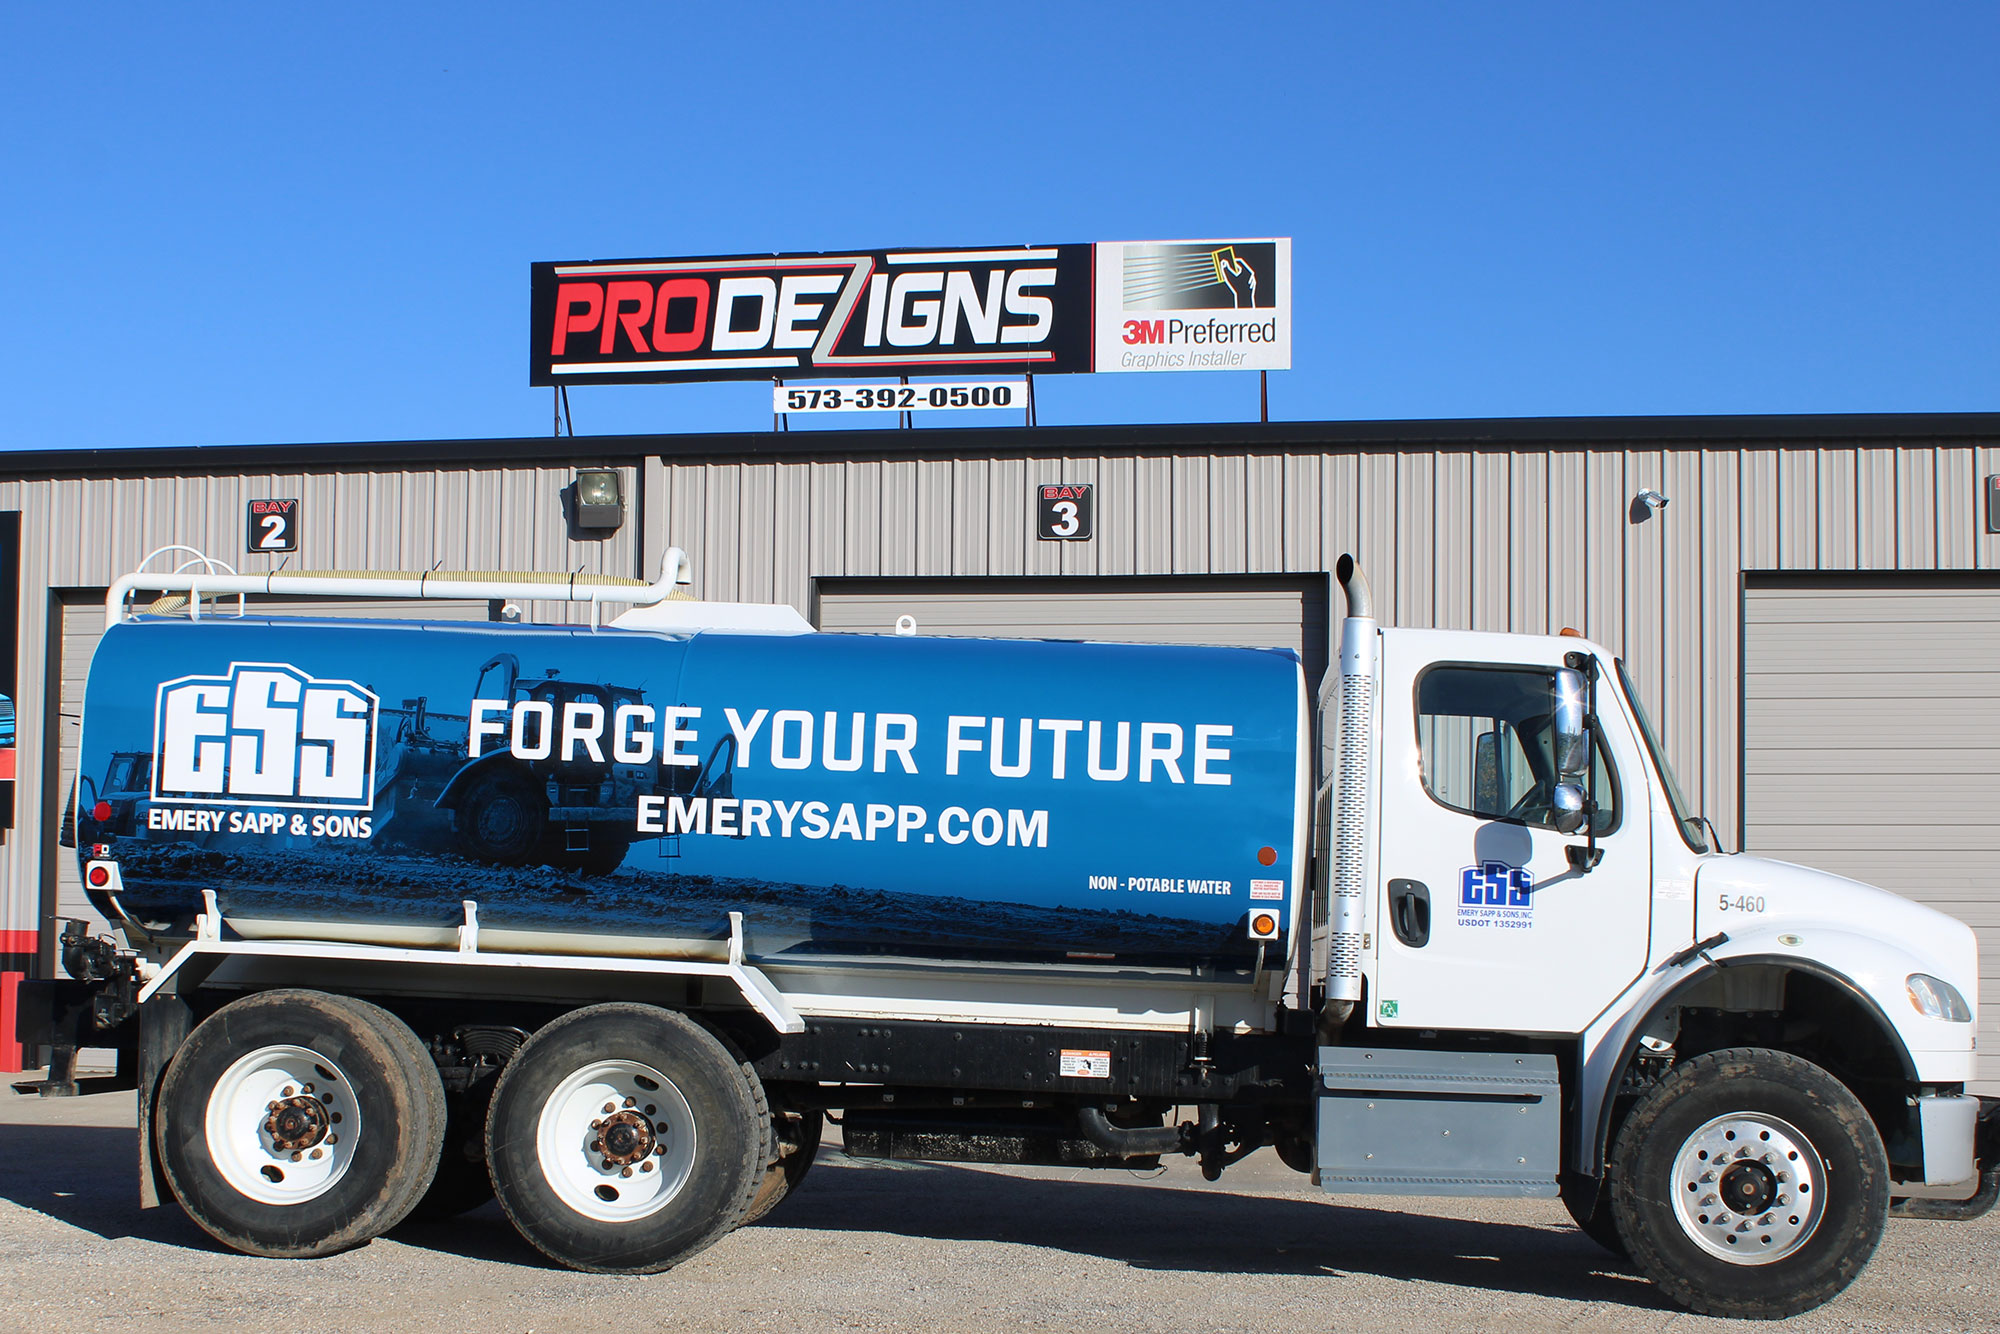 Emery Sapp And Sons Tanker Wrapping Store Fronts Windows Outdoor Pro Dezigns Jeff City Mo